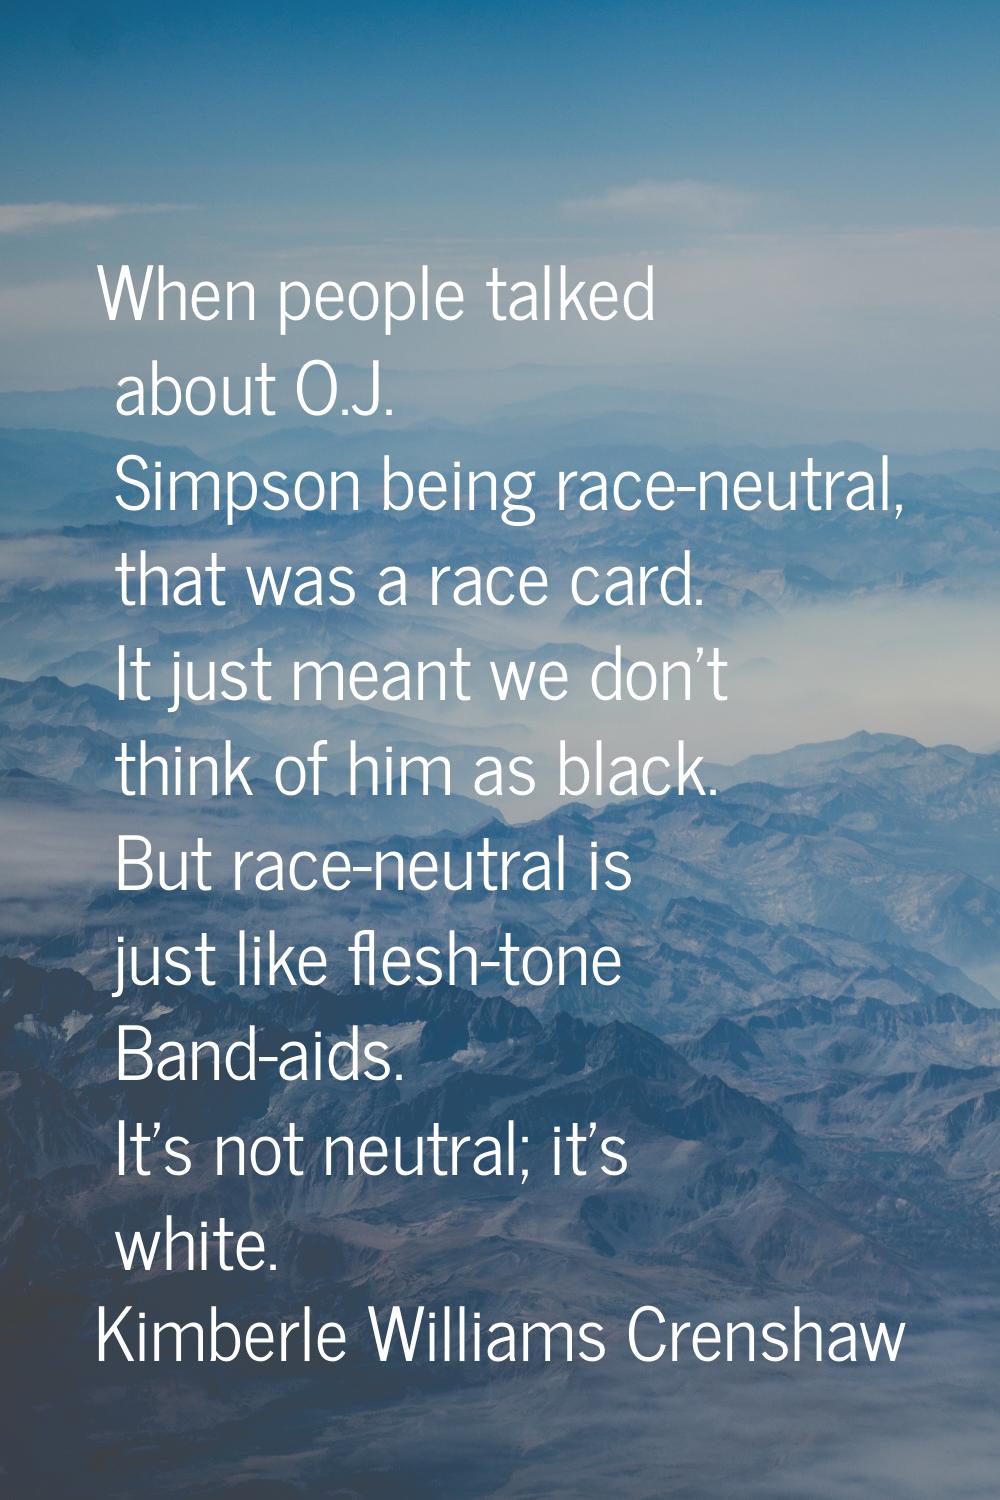 When people talked about O.J. Simpson being race-neutral, that was a race card. It just meant we do